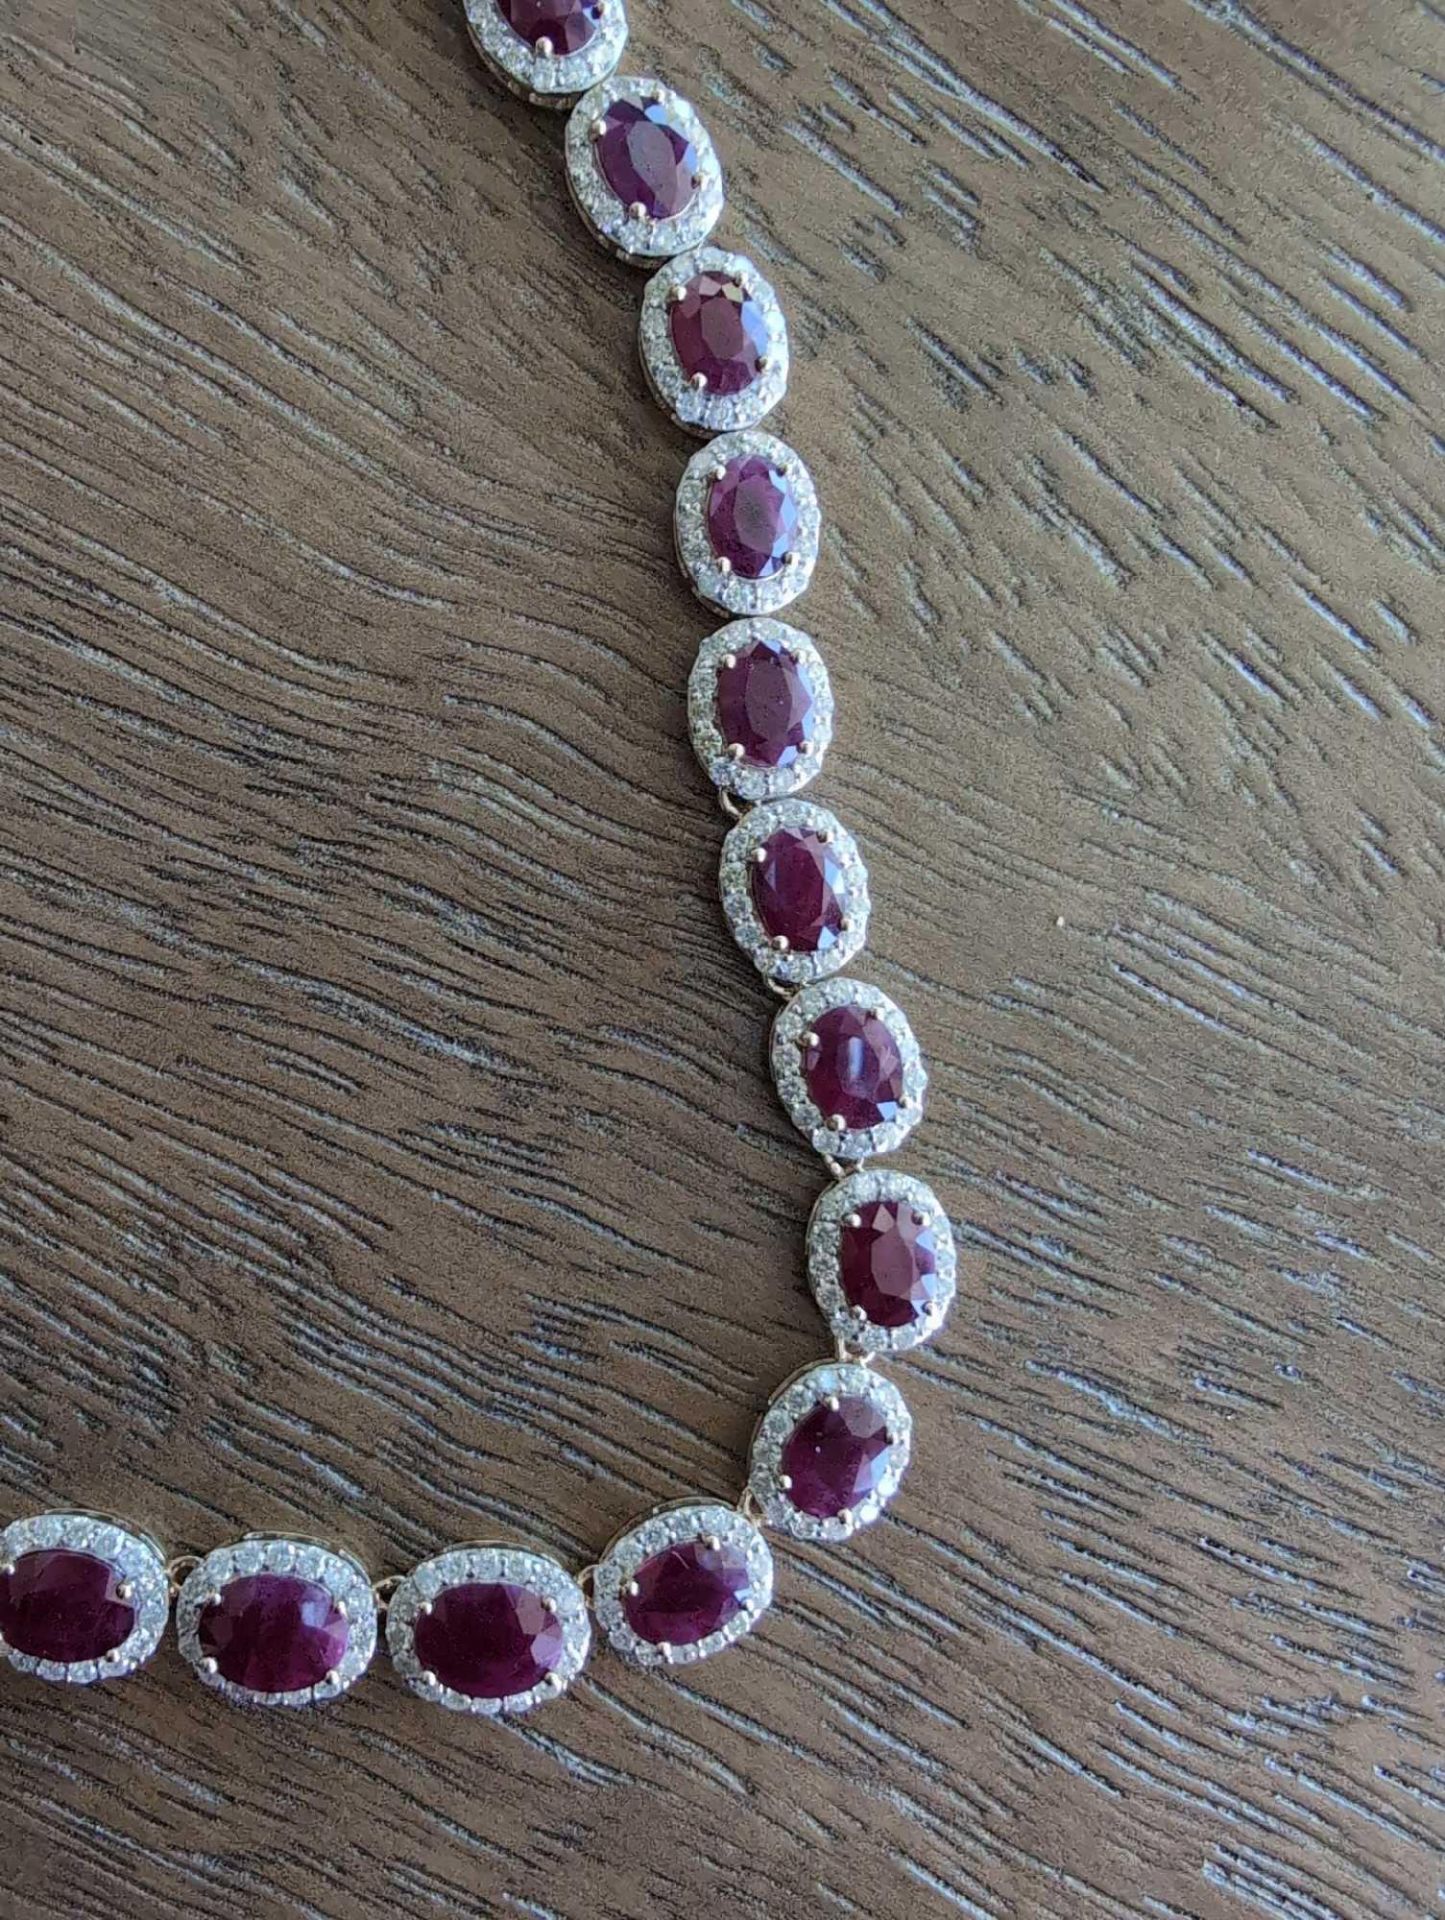 14KT Gold Ruby and Diamond Necklace - Image 2 of 12